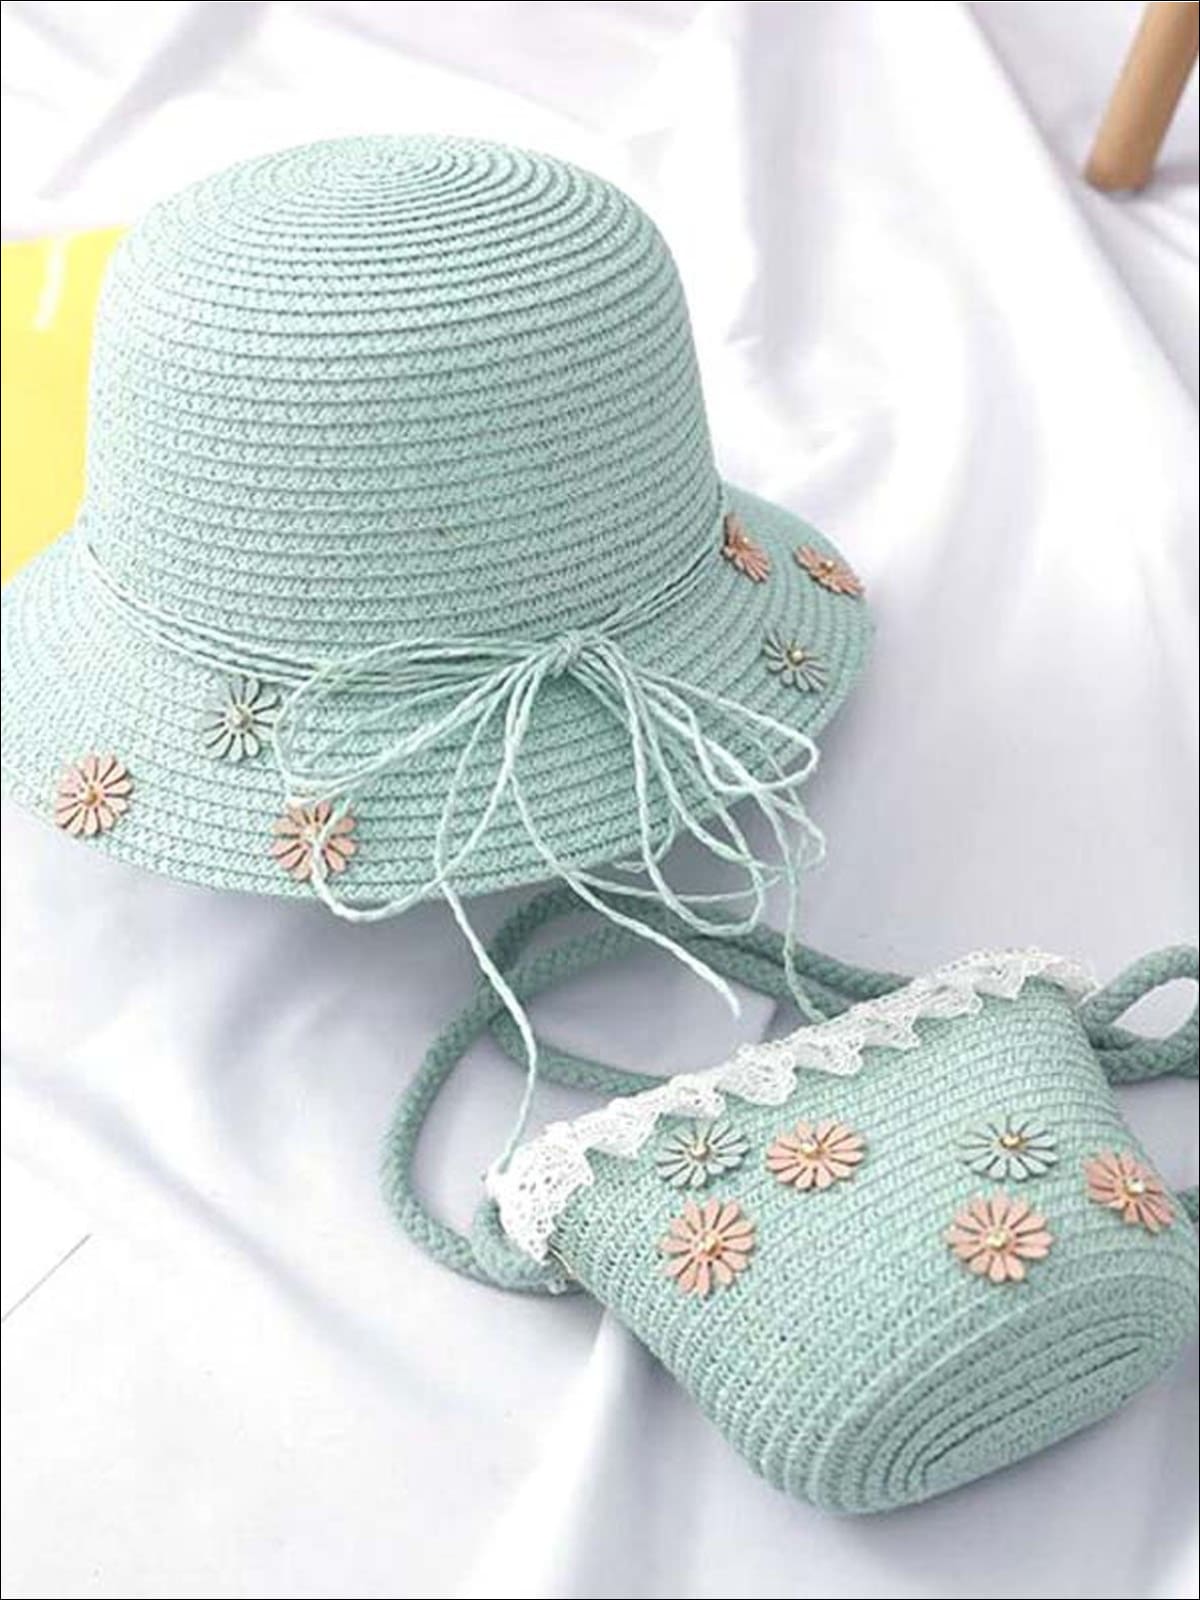 Girls Flower Embellished Straw Hat With Matching Purse - Mint - Girls Hats